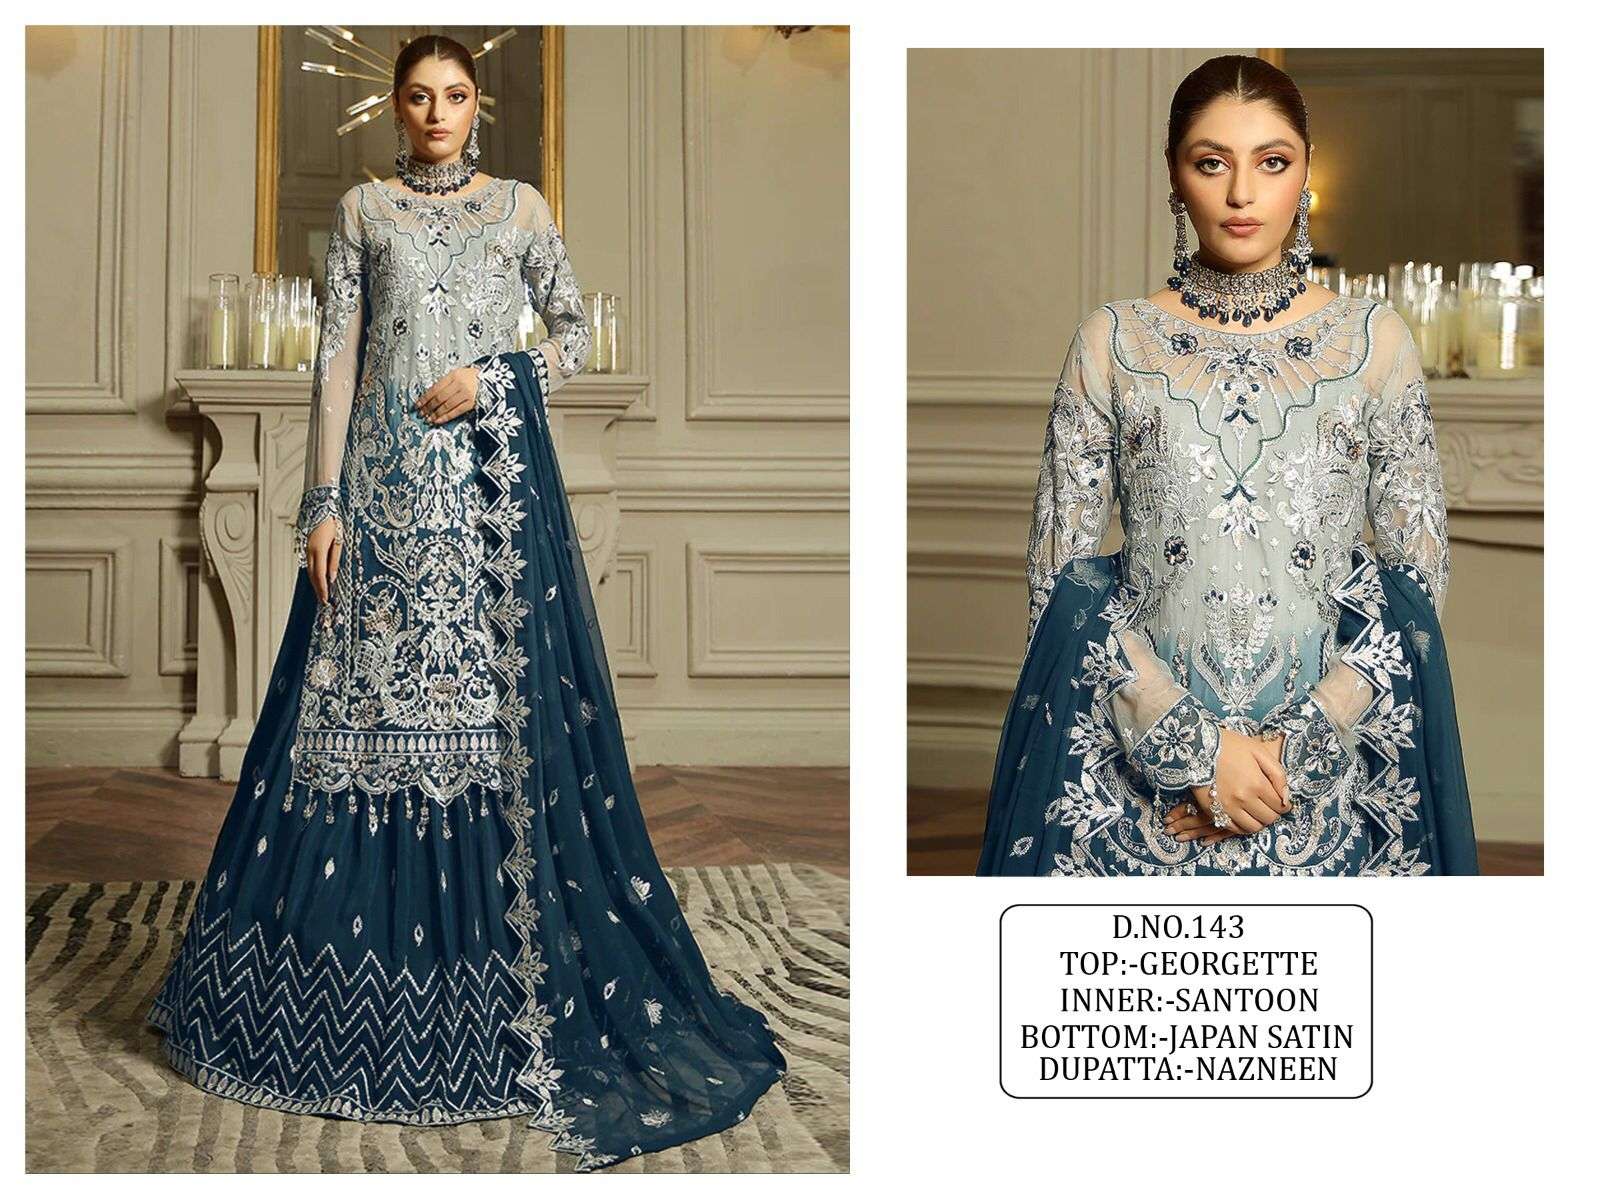 Kf-143 Colours By Fashid Wholesale 143 To 143-D Series Pakistani Suits Collection Beautiful Stylish Fancy Colorful Party Wear & Occasional Wear Georgette Embroidered Dresses At Wholesale Price